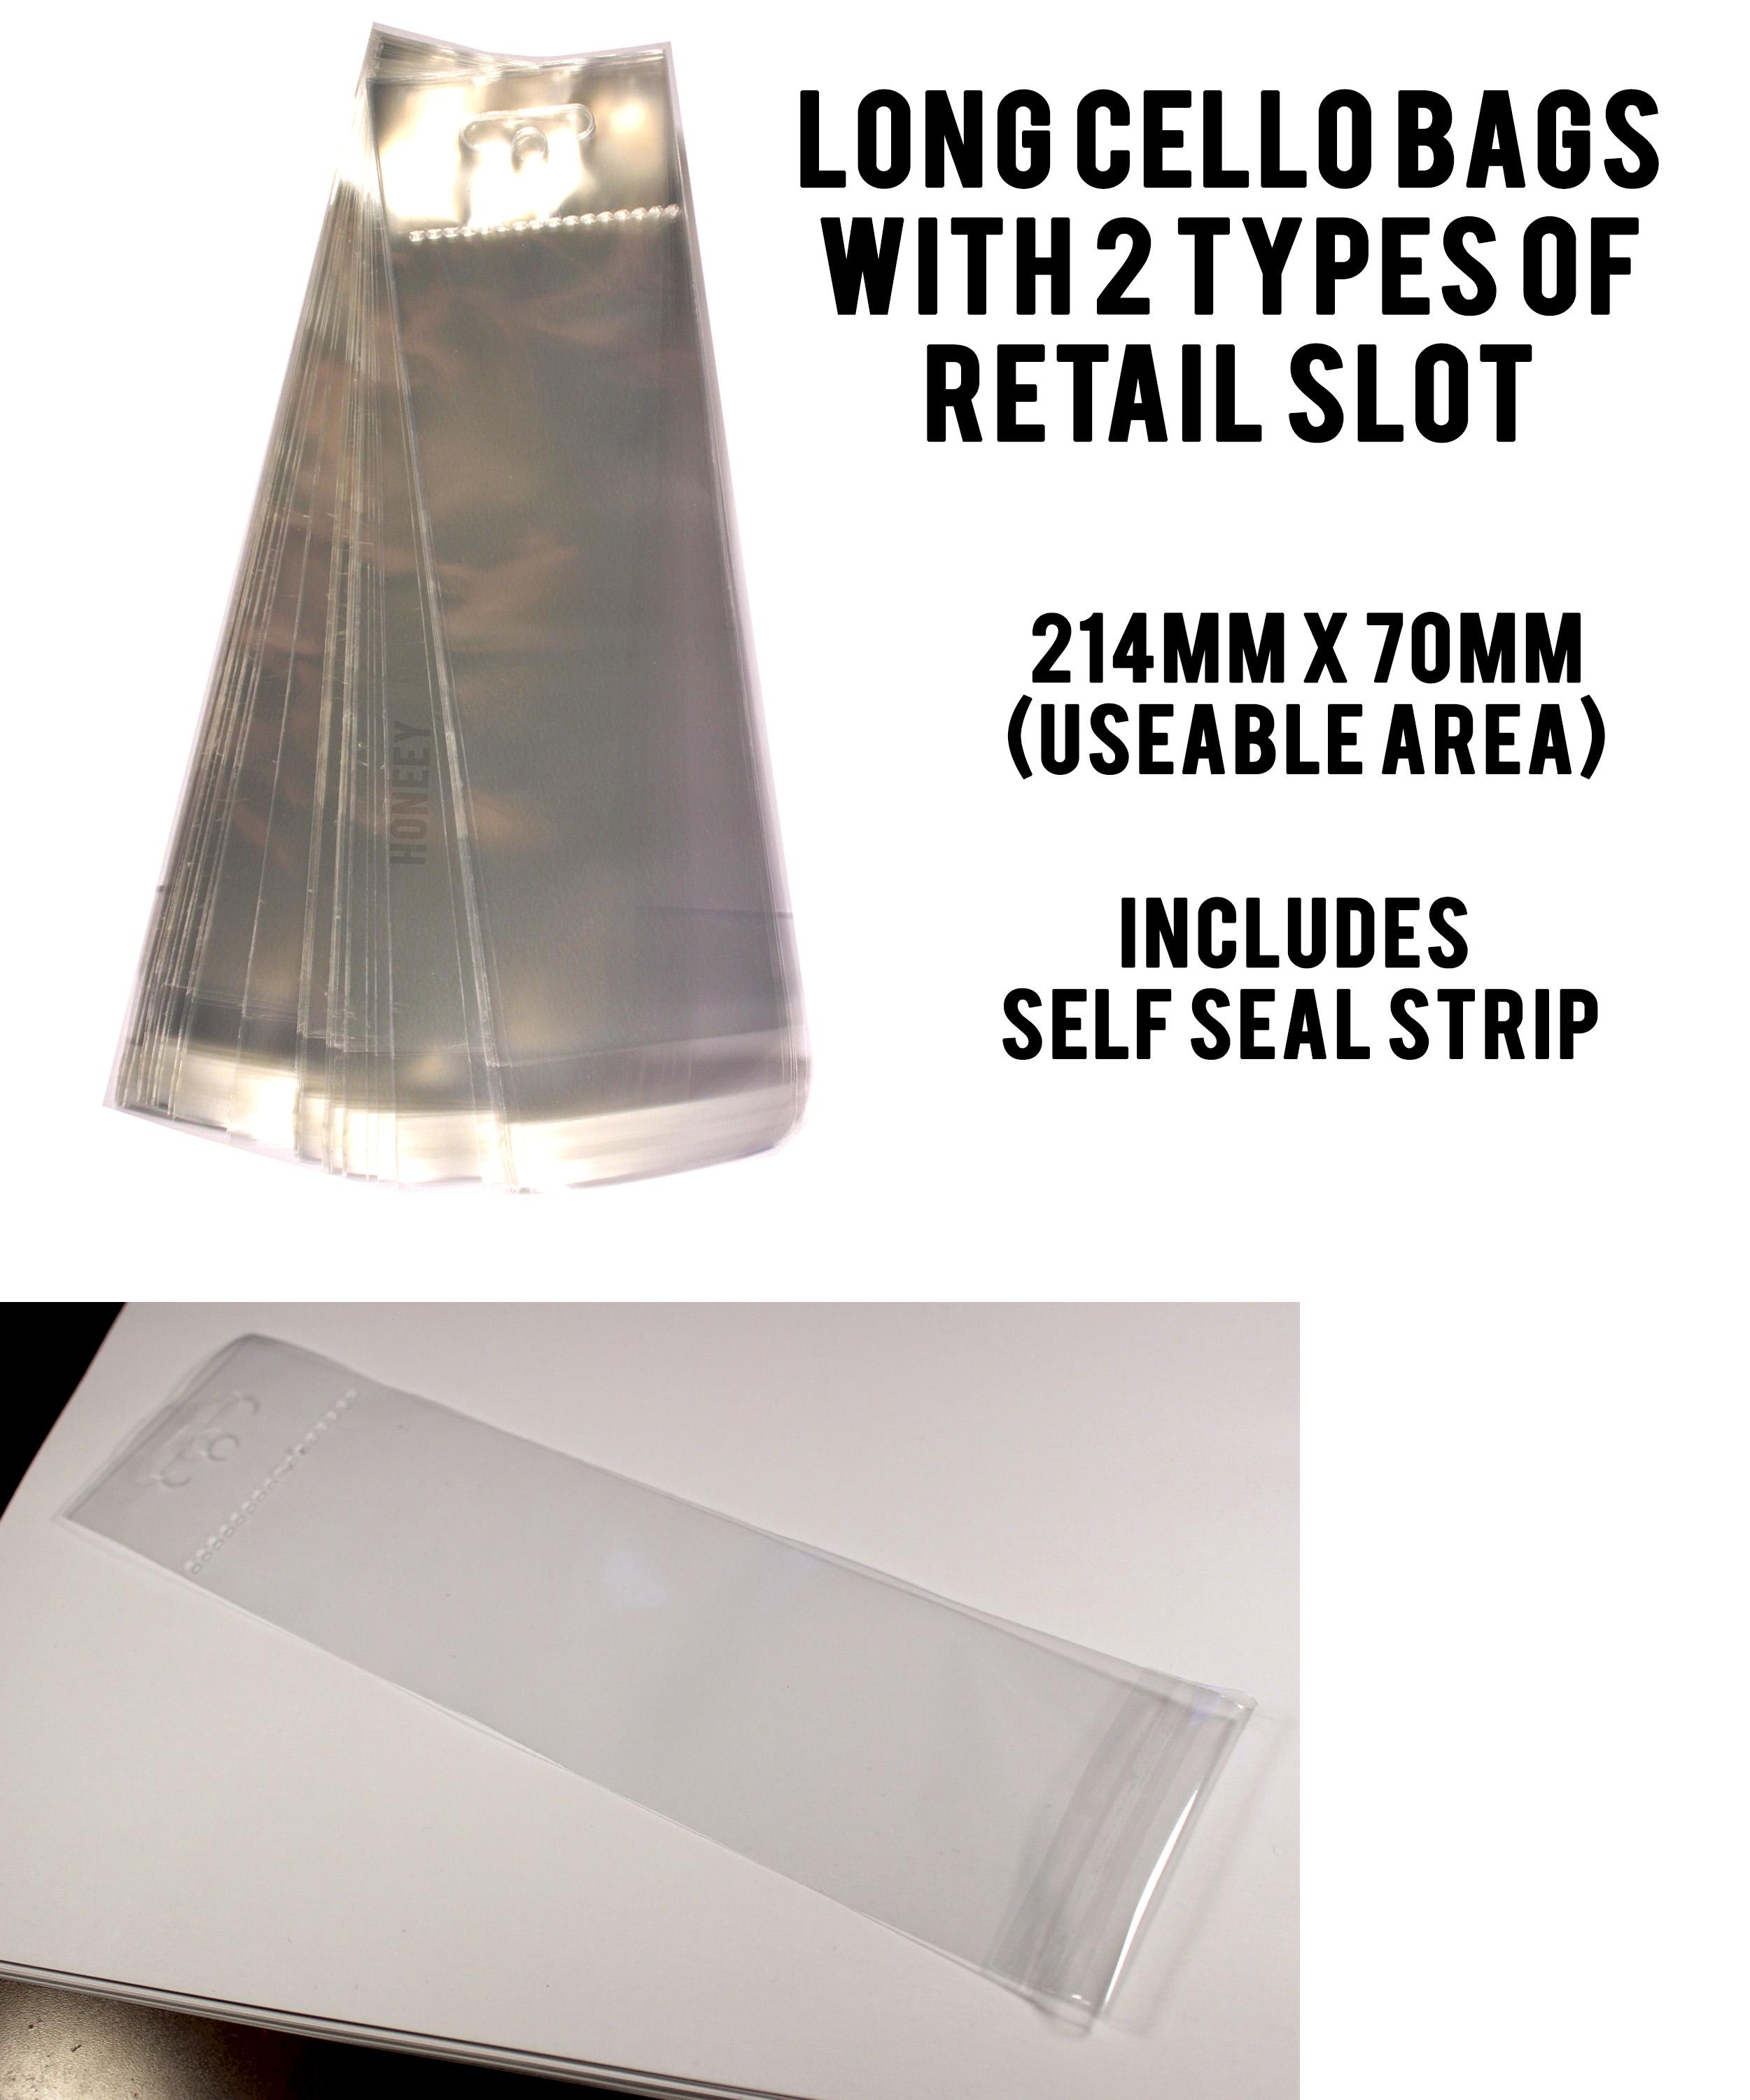 Long Cello Bags cover with information